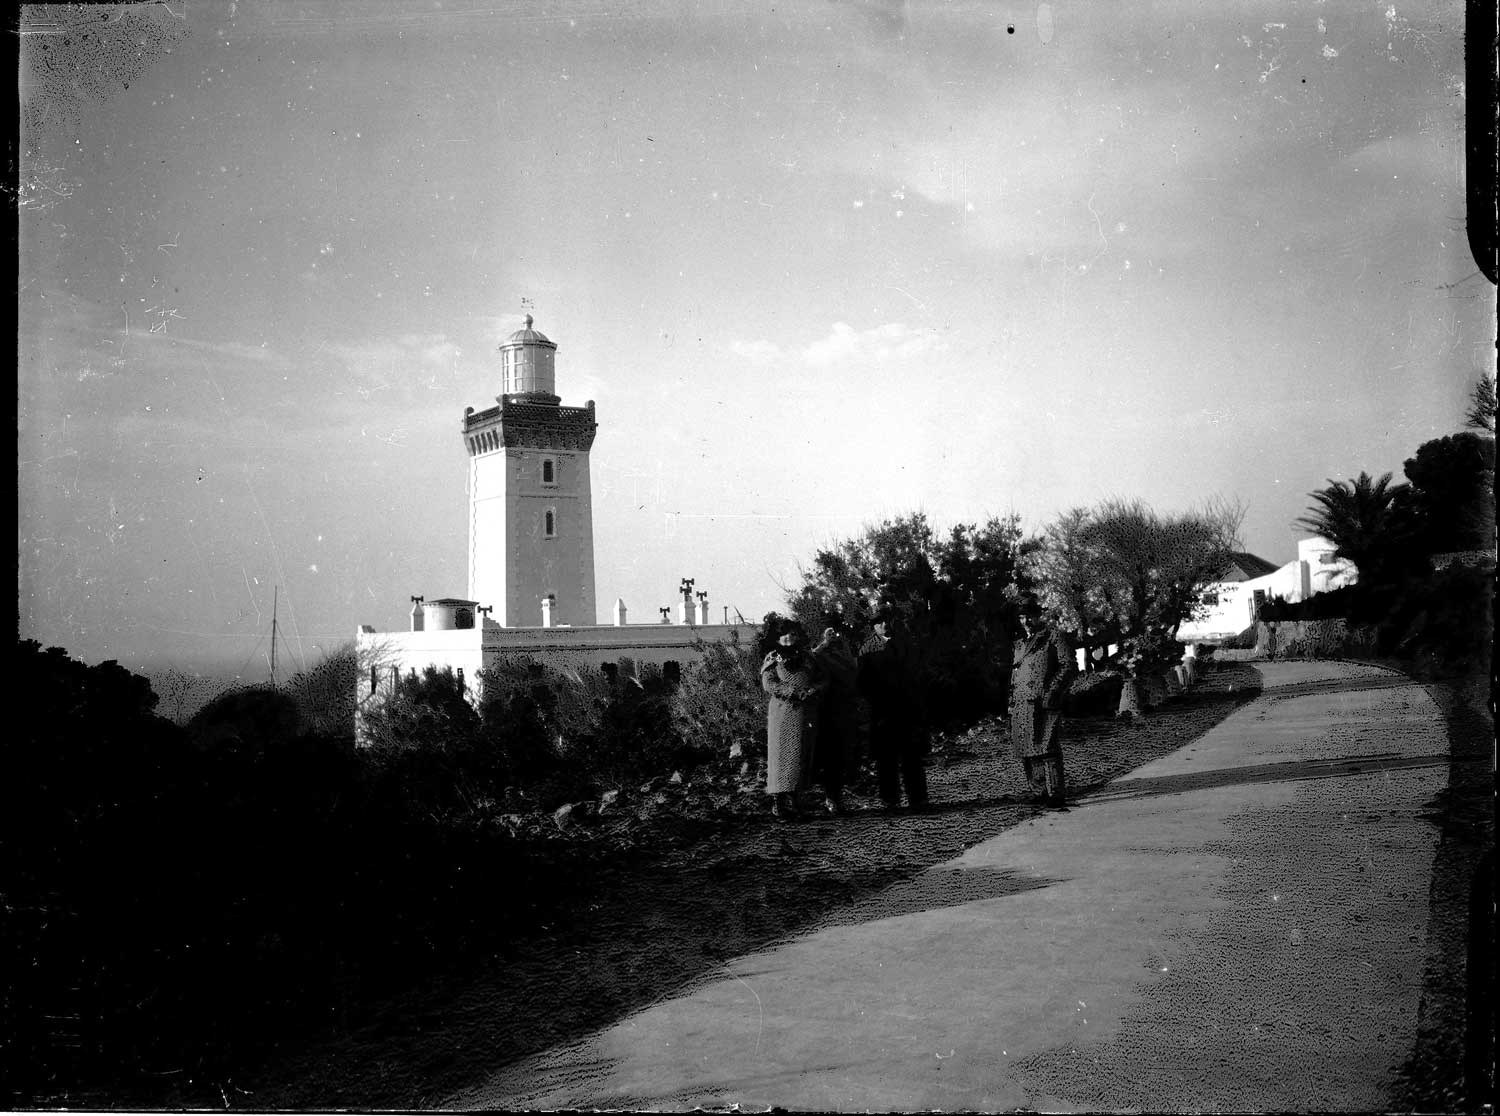 Group of four in Western clothing viewed form the road in front of the lighthouse